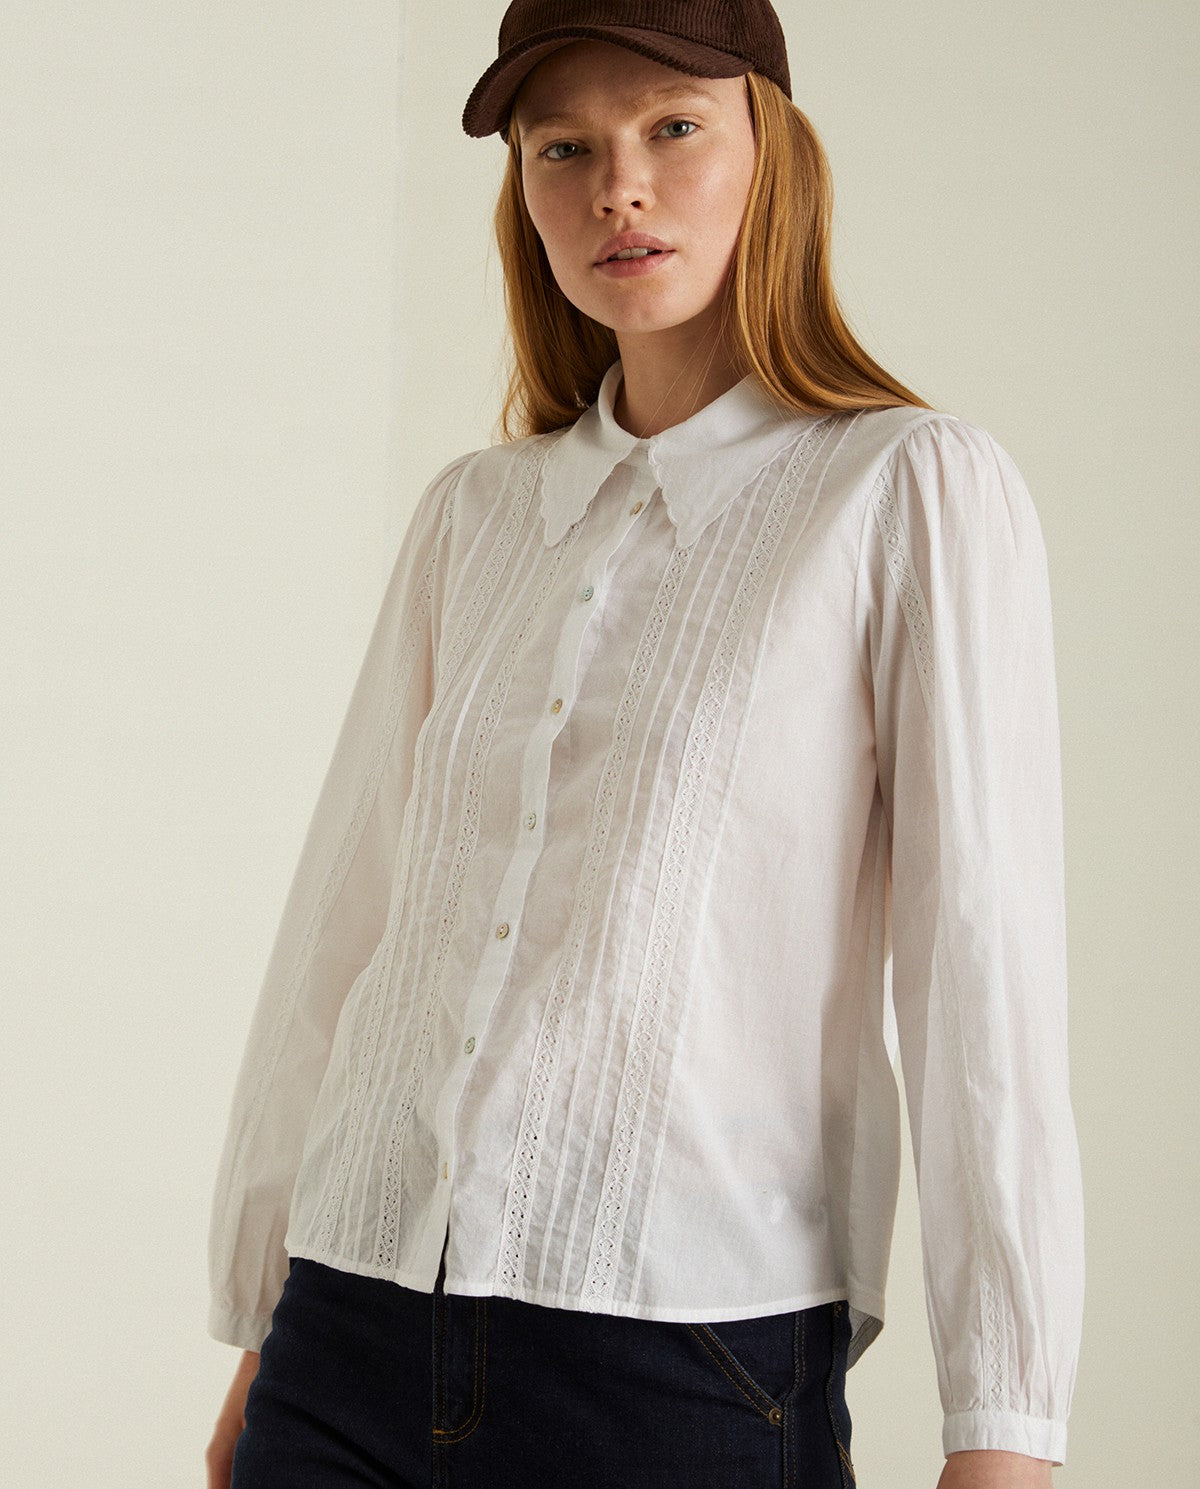 Yerse Embroidered Cotton Shirt